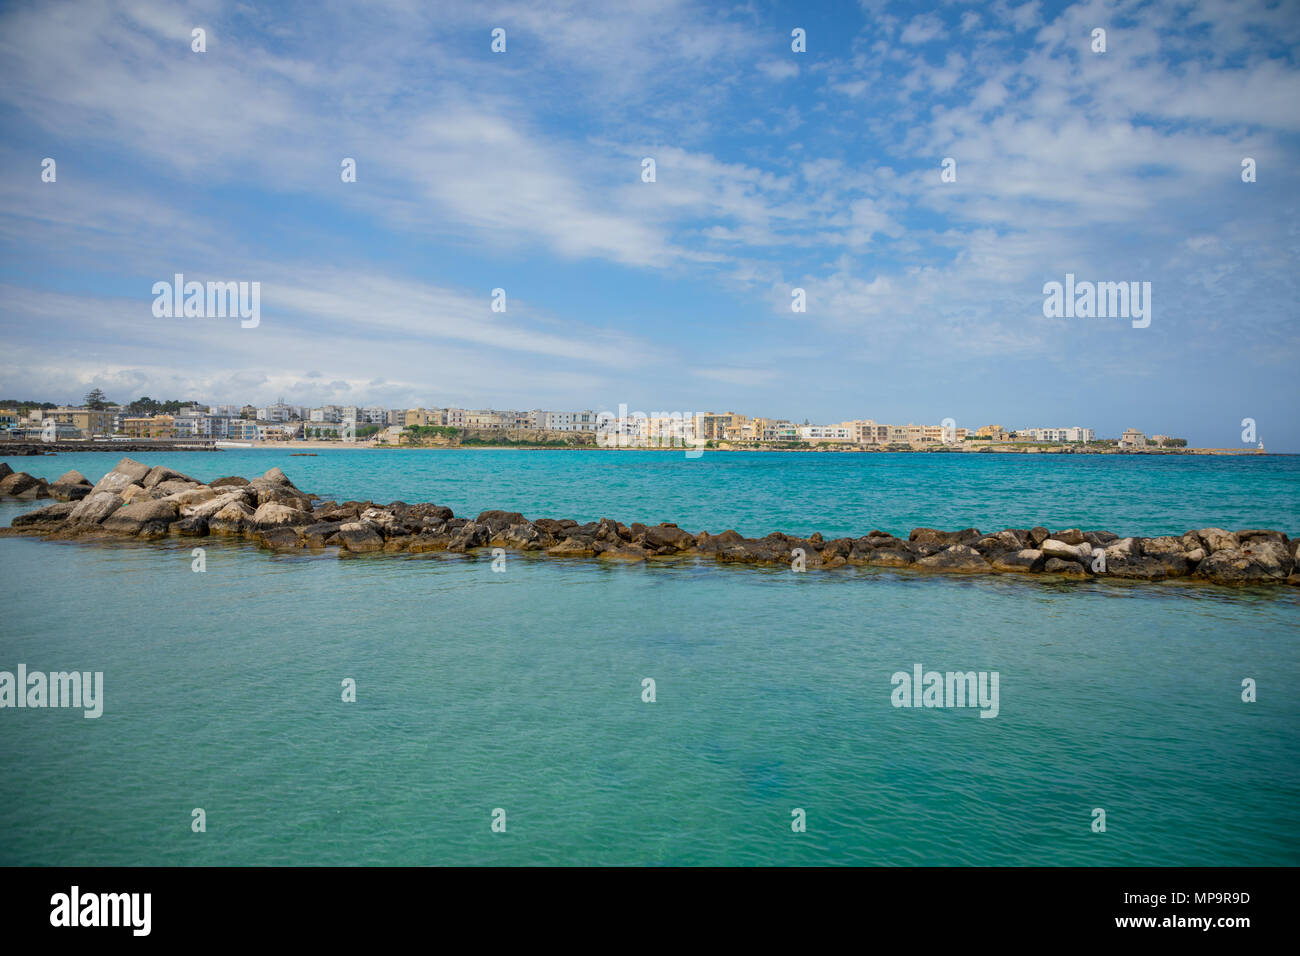 View of small town Otranto from Aragonese Castle, province of Lecce in the Salento peninsula, Italy Stock Photo